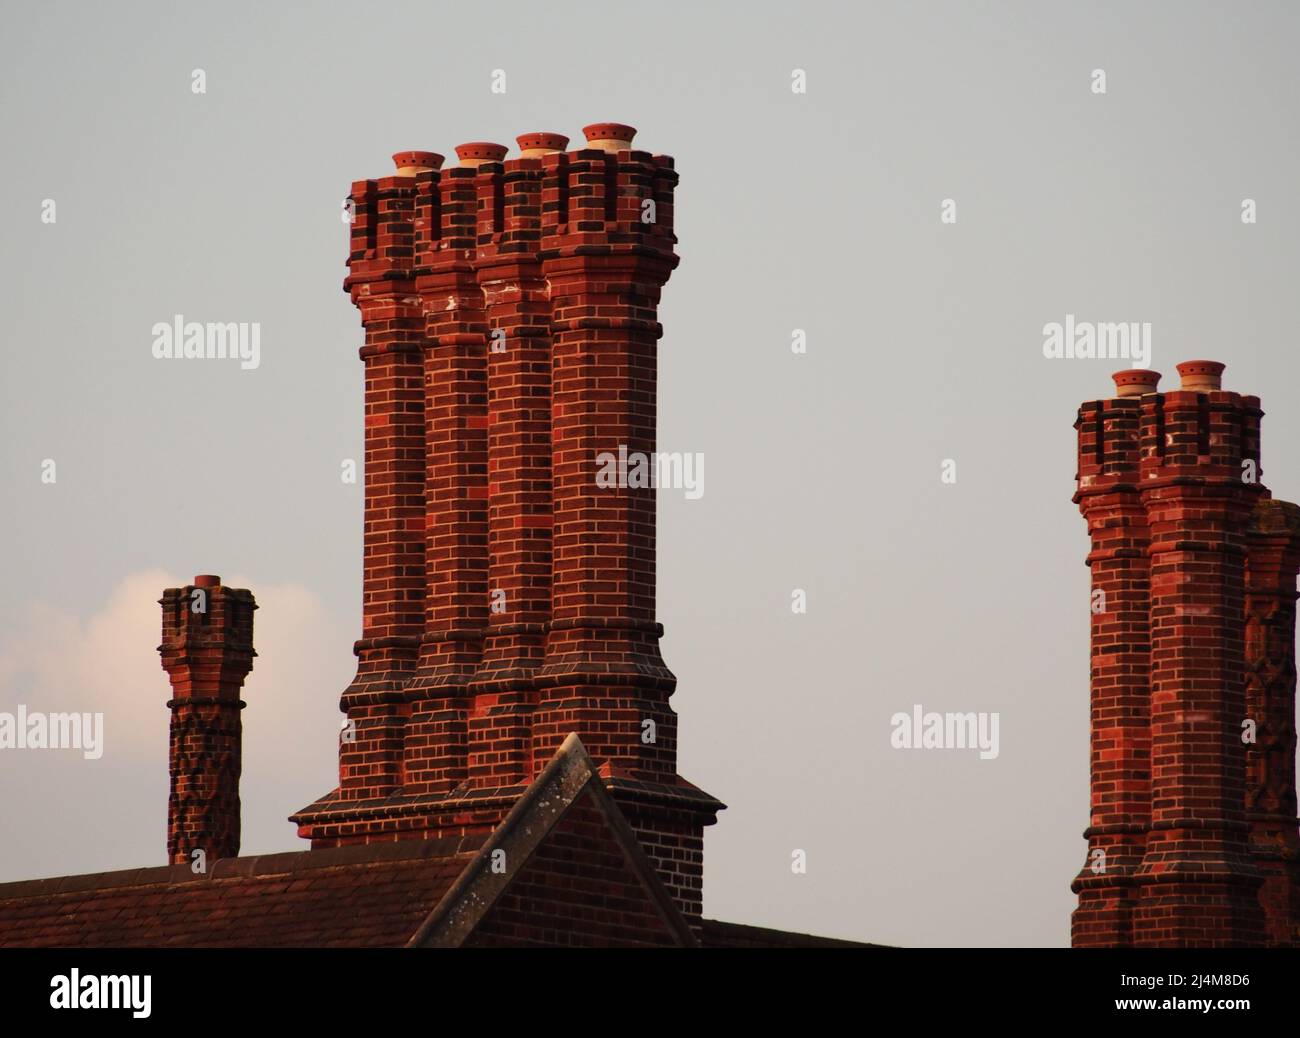 A view of some of the red brick, ornate chimneys of Hampton Court Palace, London, Surrey, England, the home of King Henry VIII Stock Photo